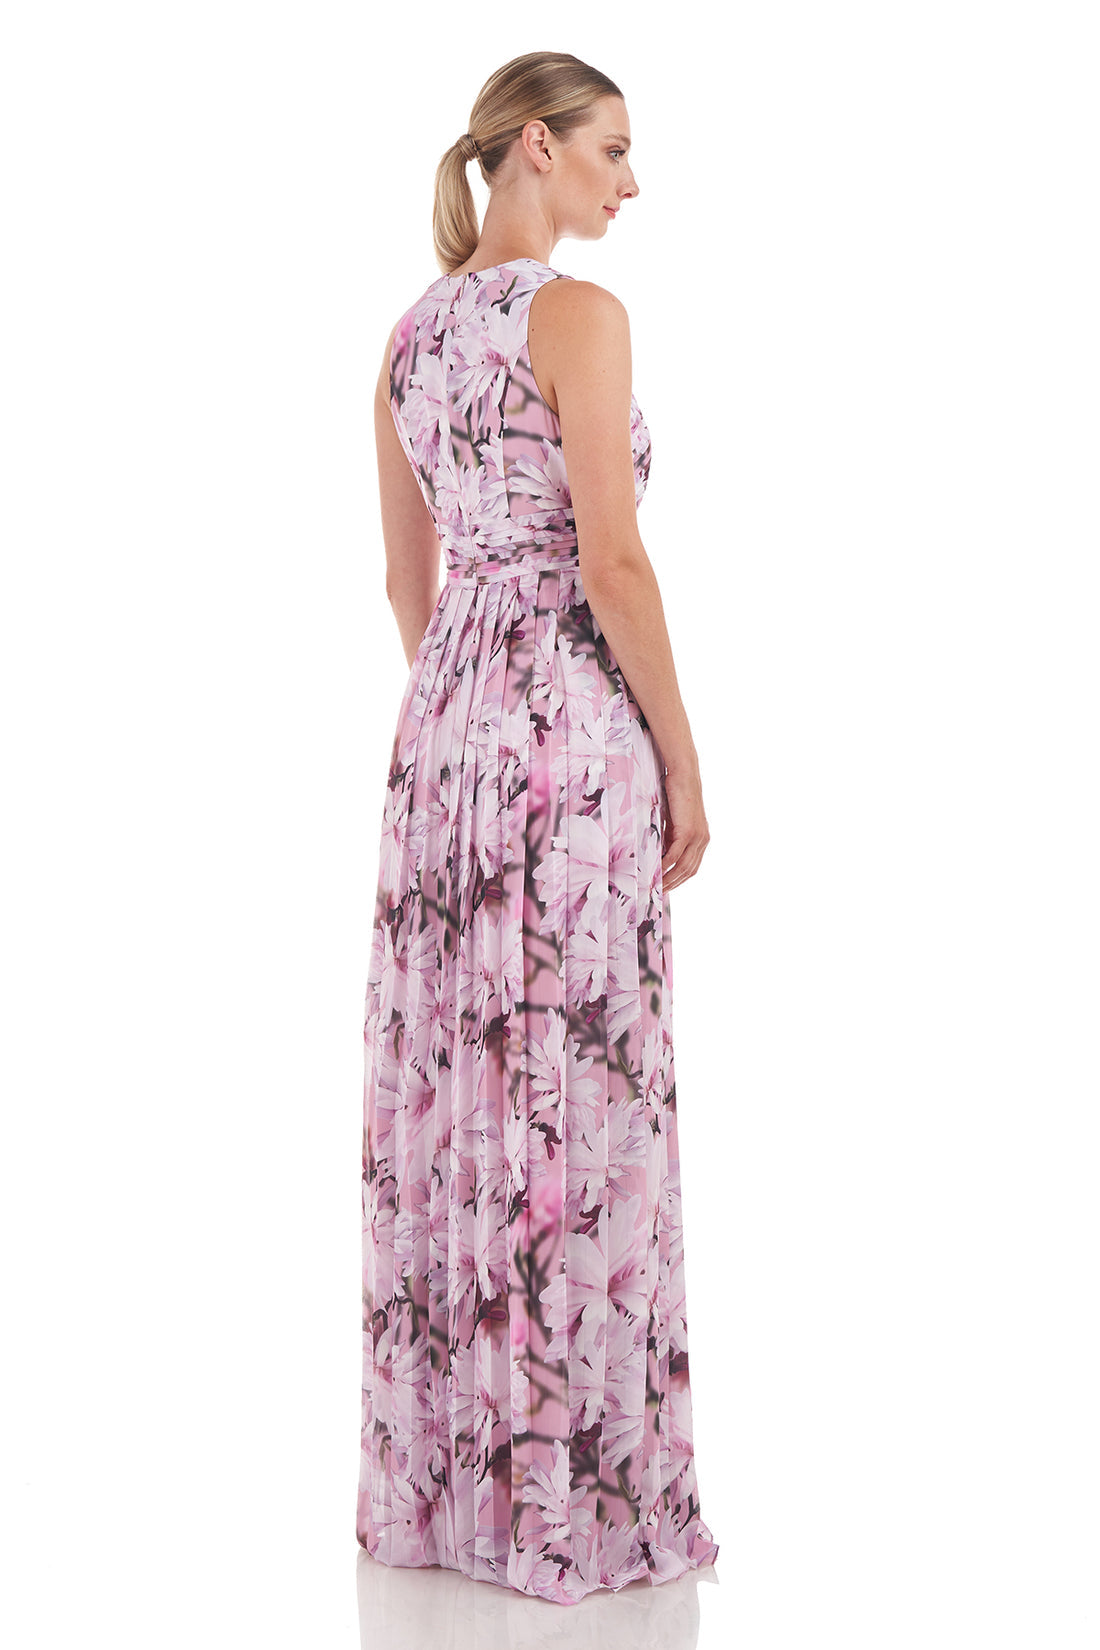 Maura Floral Gown